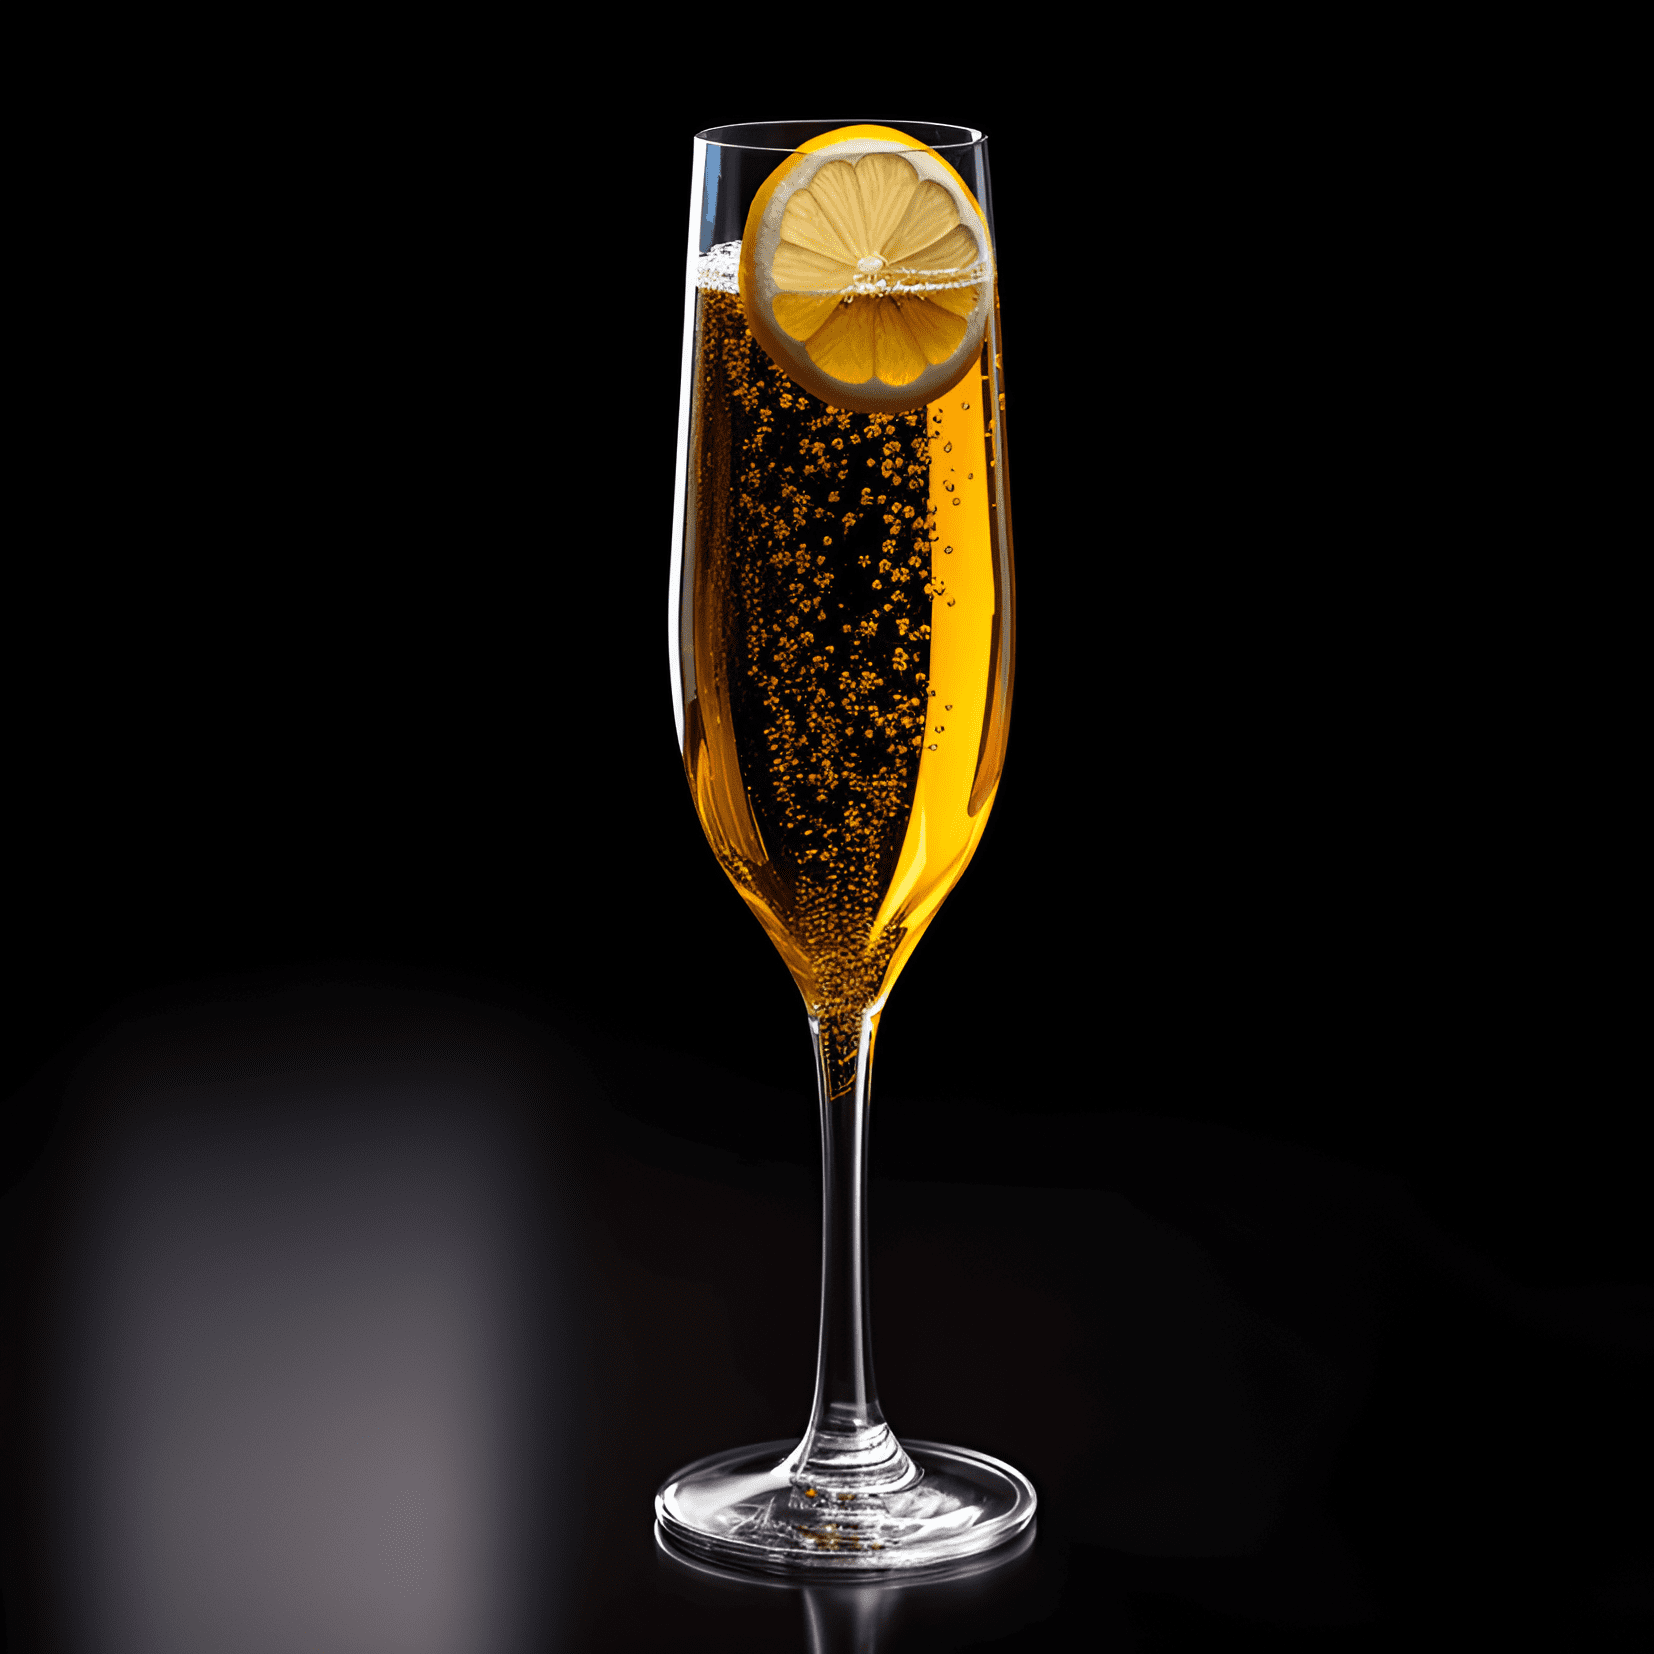 French 95 Cocktail Recipe - The French 95 has a smooth, rich taste with a hint of sweetness from the simple syrup and a touch of tartness from the lemon juice. The bourbon adds warmth and depth, while the champagne brings a light, effervescent finish.